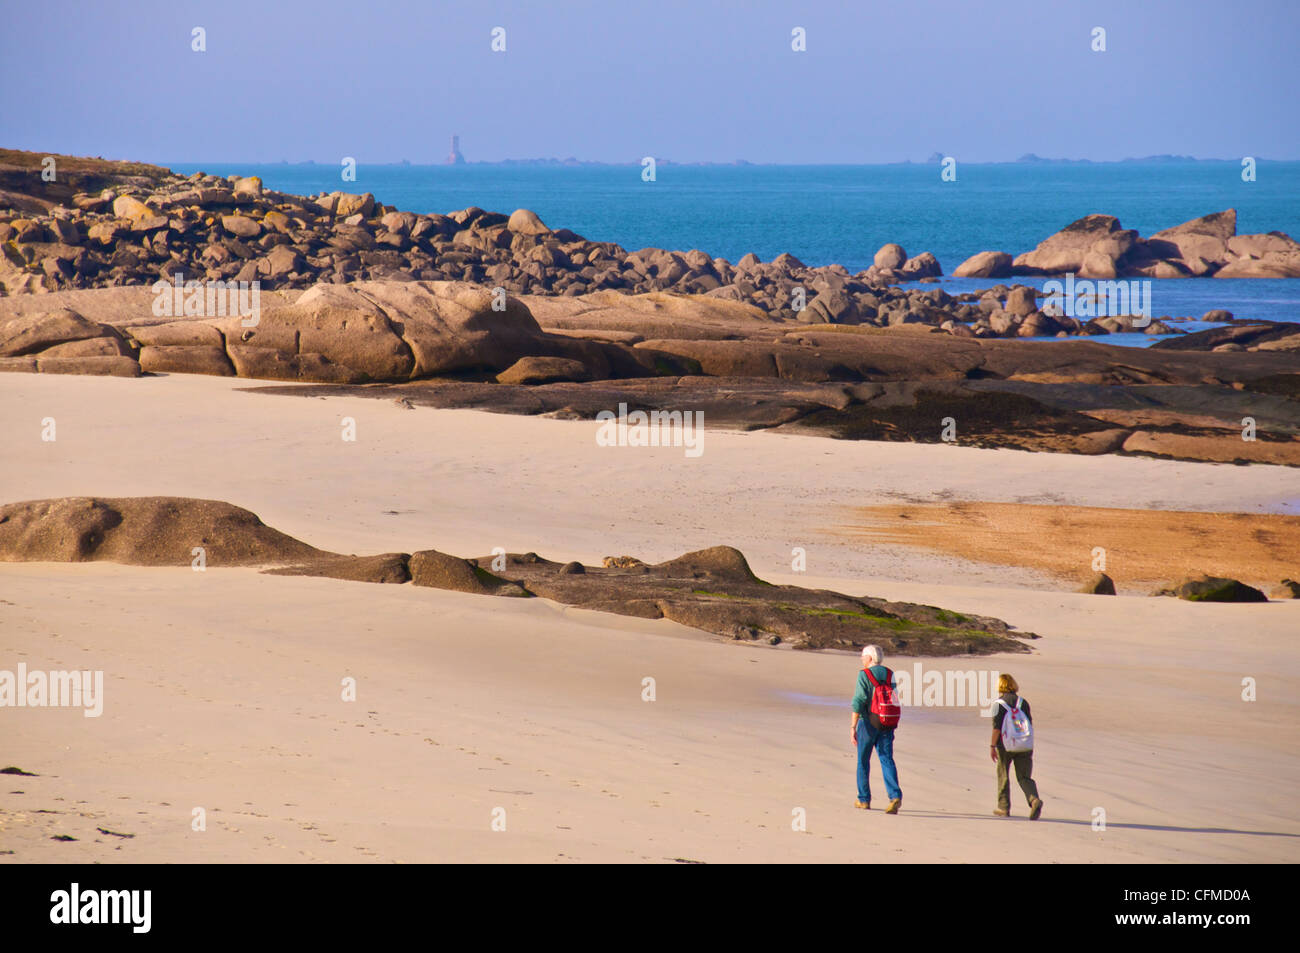 Two people walking along the beach, Ploumanach, Cotes d'Armor, Brittany, France, Europe Stock Photo